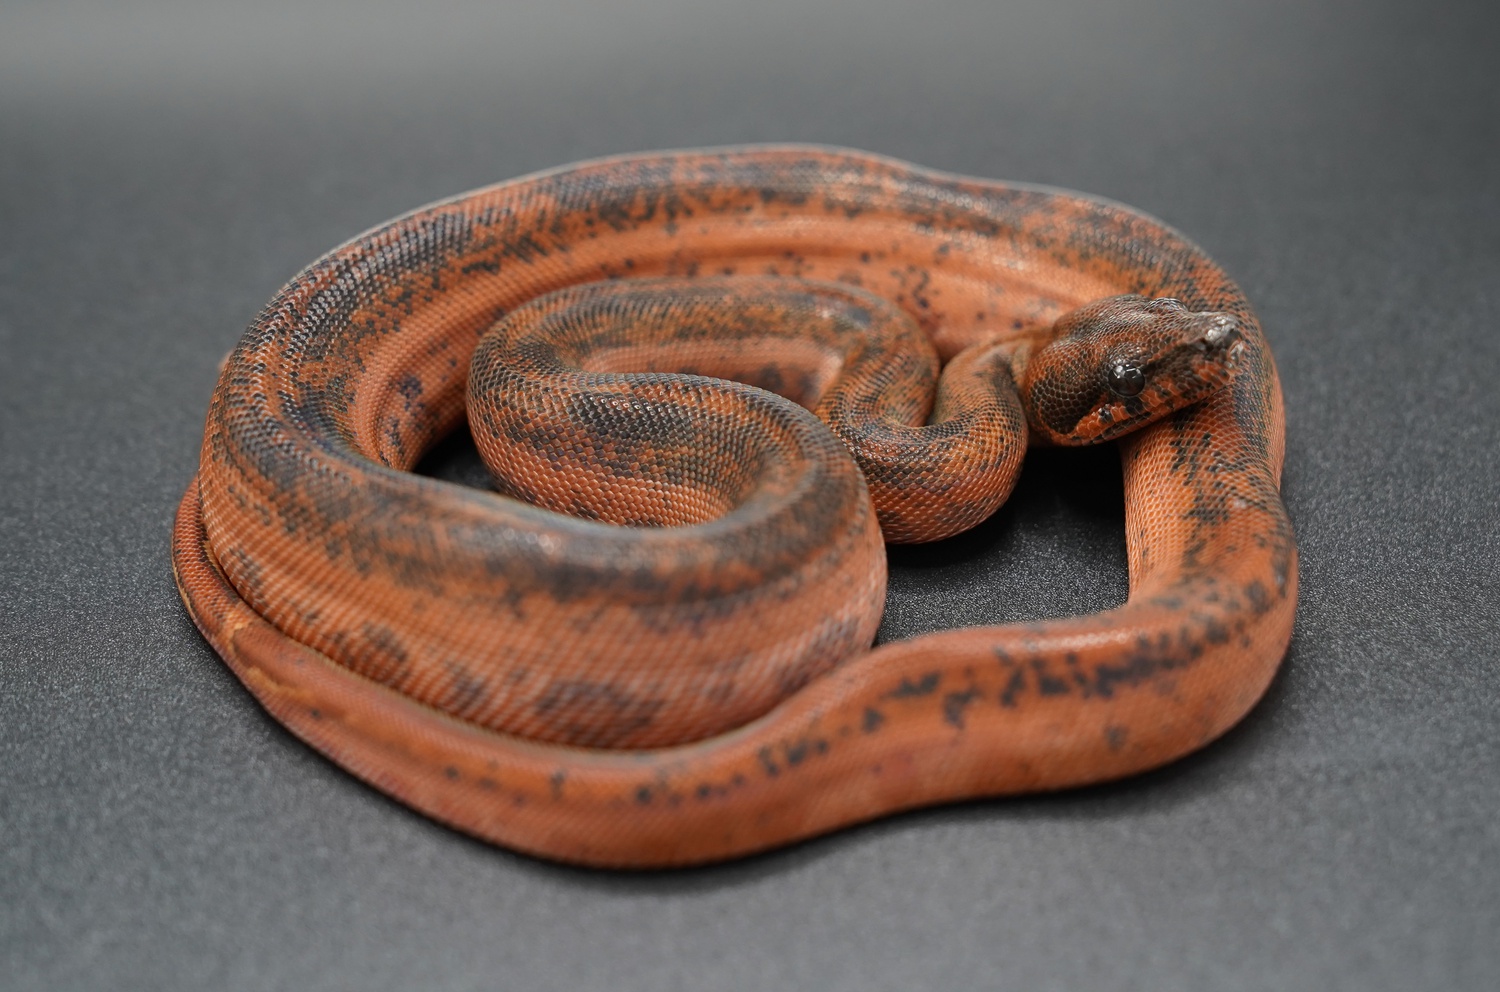 Hypo Black Panther 66% Het. T+ Albino Boa Constrictor by BoaTempel